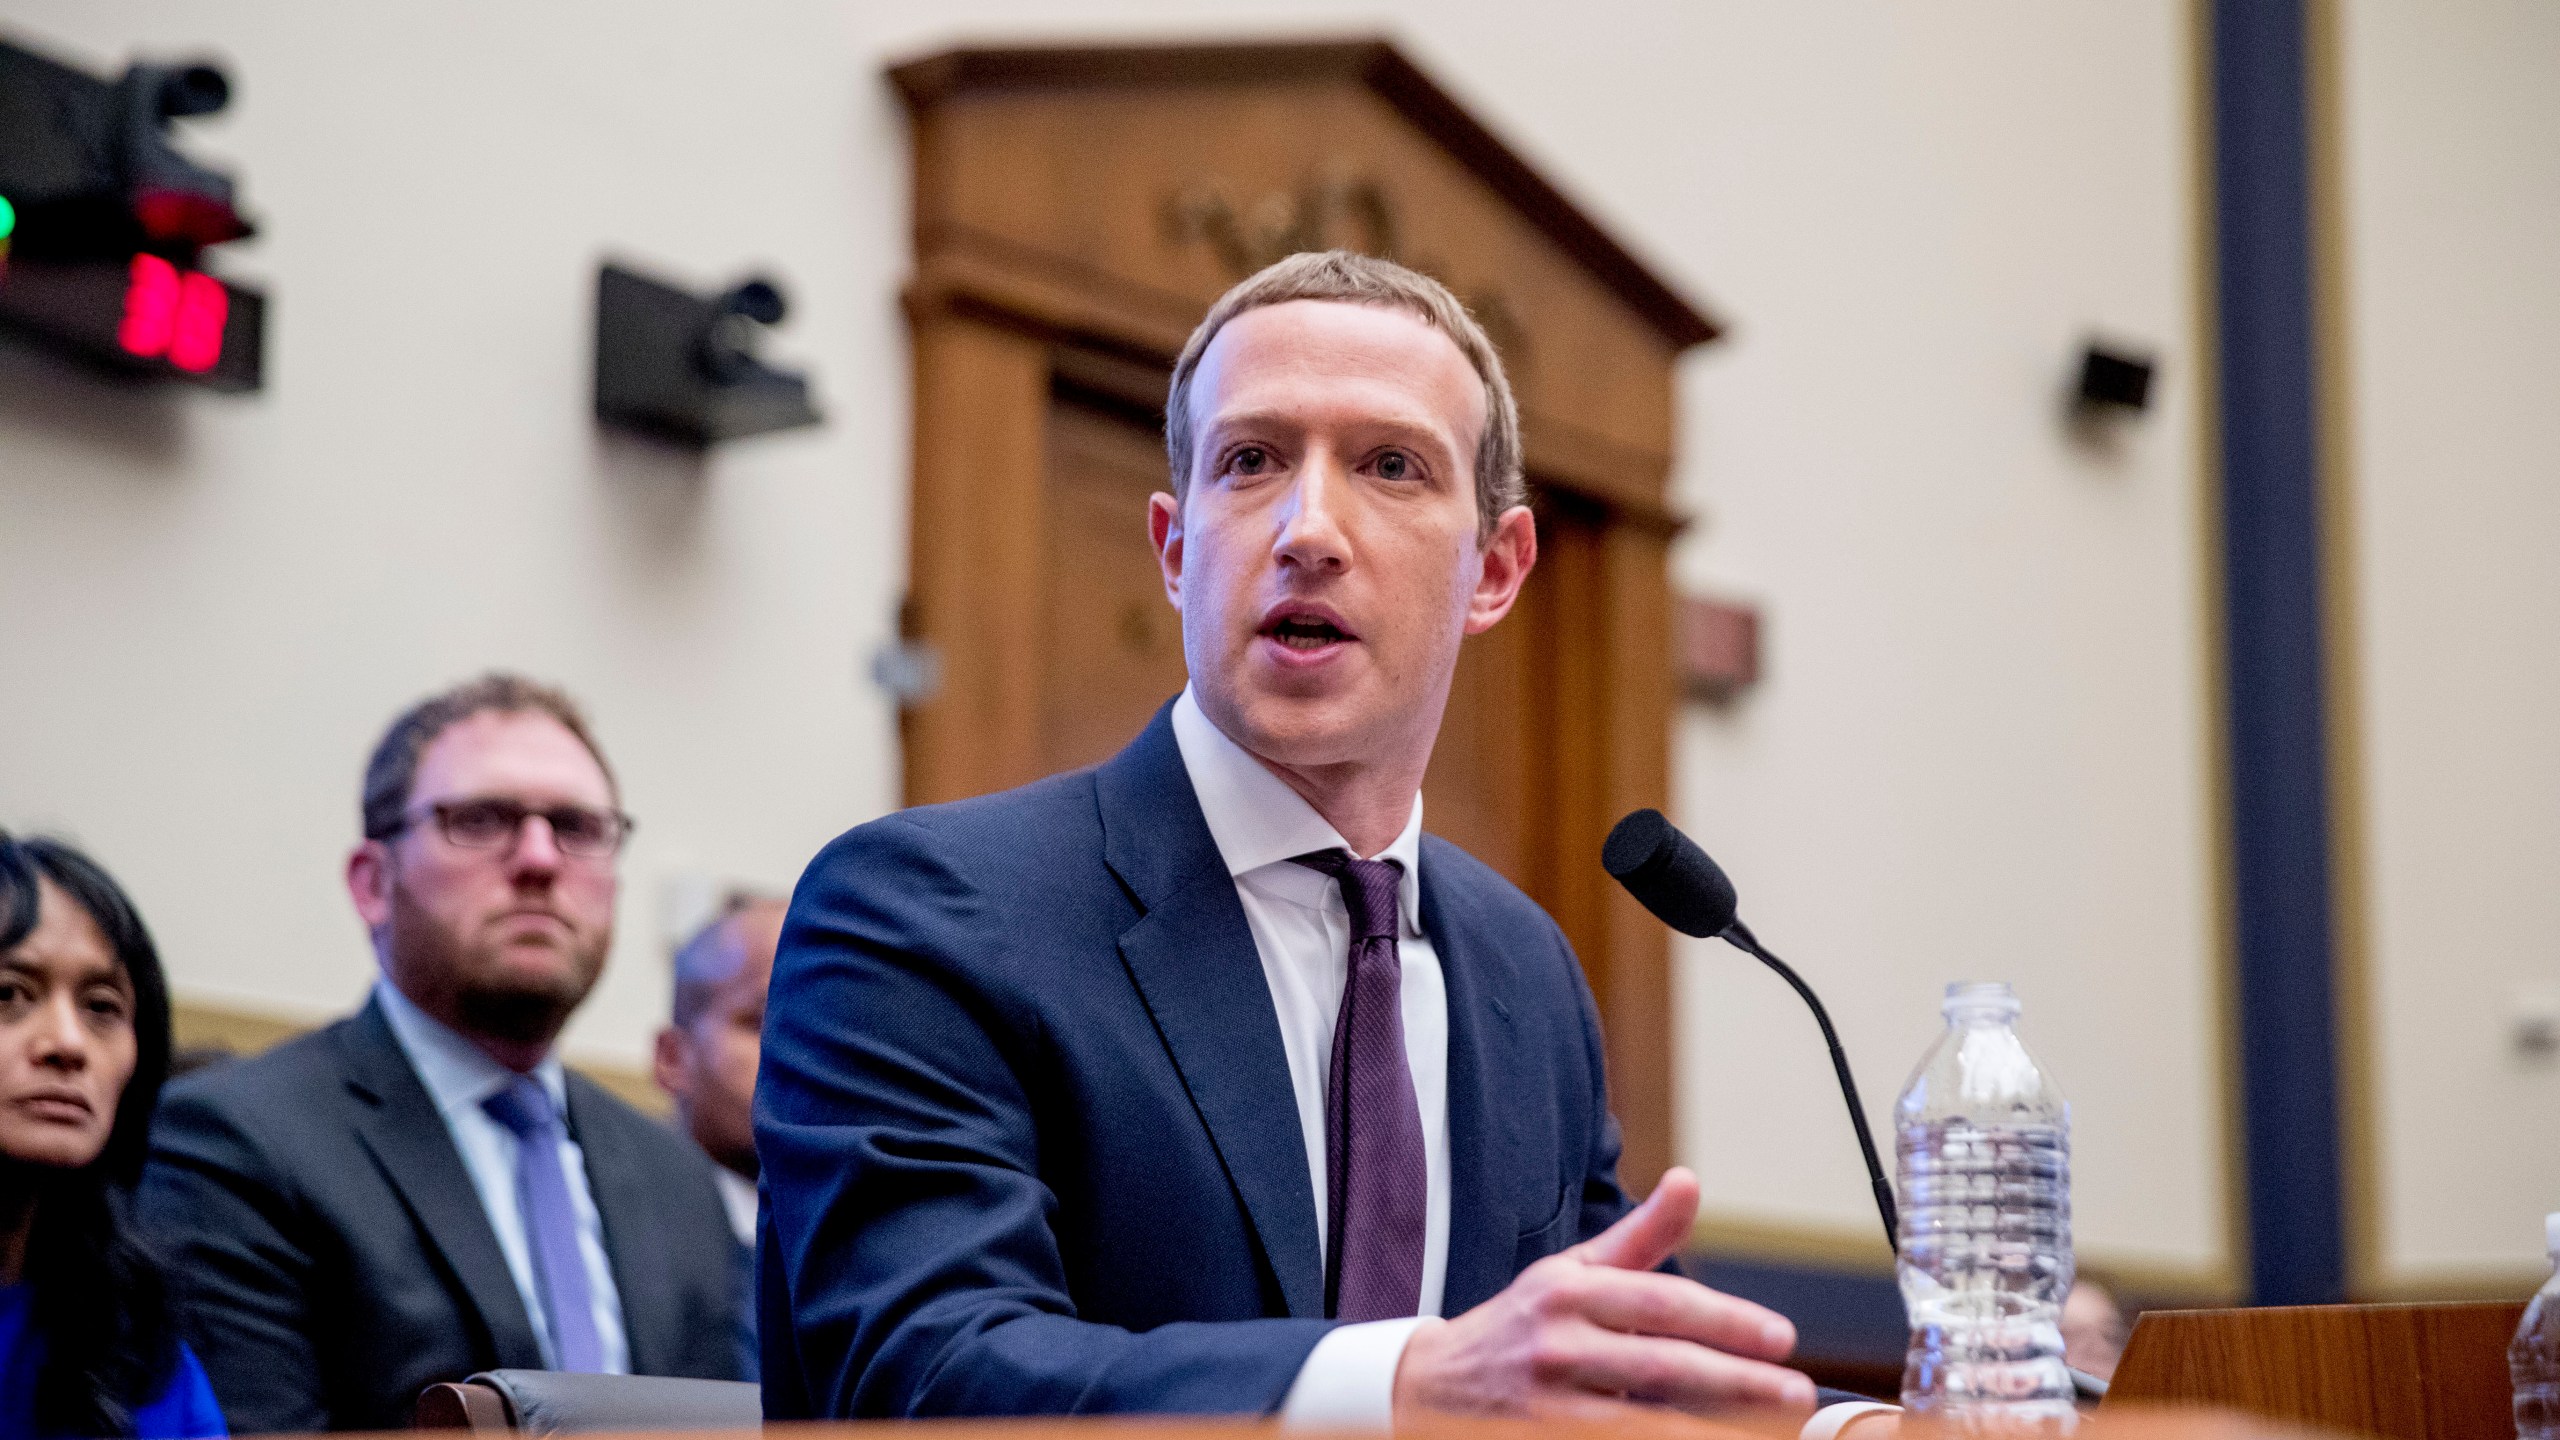 FILE - Facebook CEO Mark Zuckerberg testifies before a House Financial Services Committee hearing on Capitol Hill in Washington, Oct. 23, 2019. Attorneys for Meta Platforms and several of its current and former leaders, including founder Zuckerberg, are asking a Delaware judge to dismiss a shareholder lawsuit alleging the company has deliberately failed to protect users of its social media platforms from human trafficking and child sexual exploitation. (AP Photo/Andrew Harnik, File)